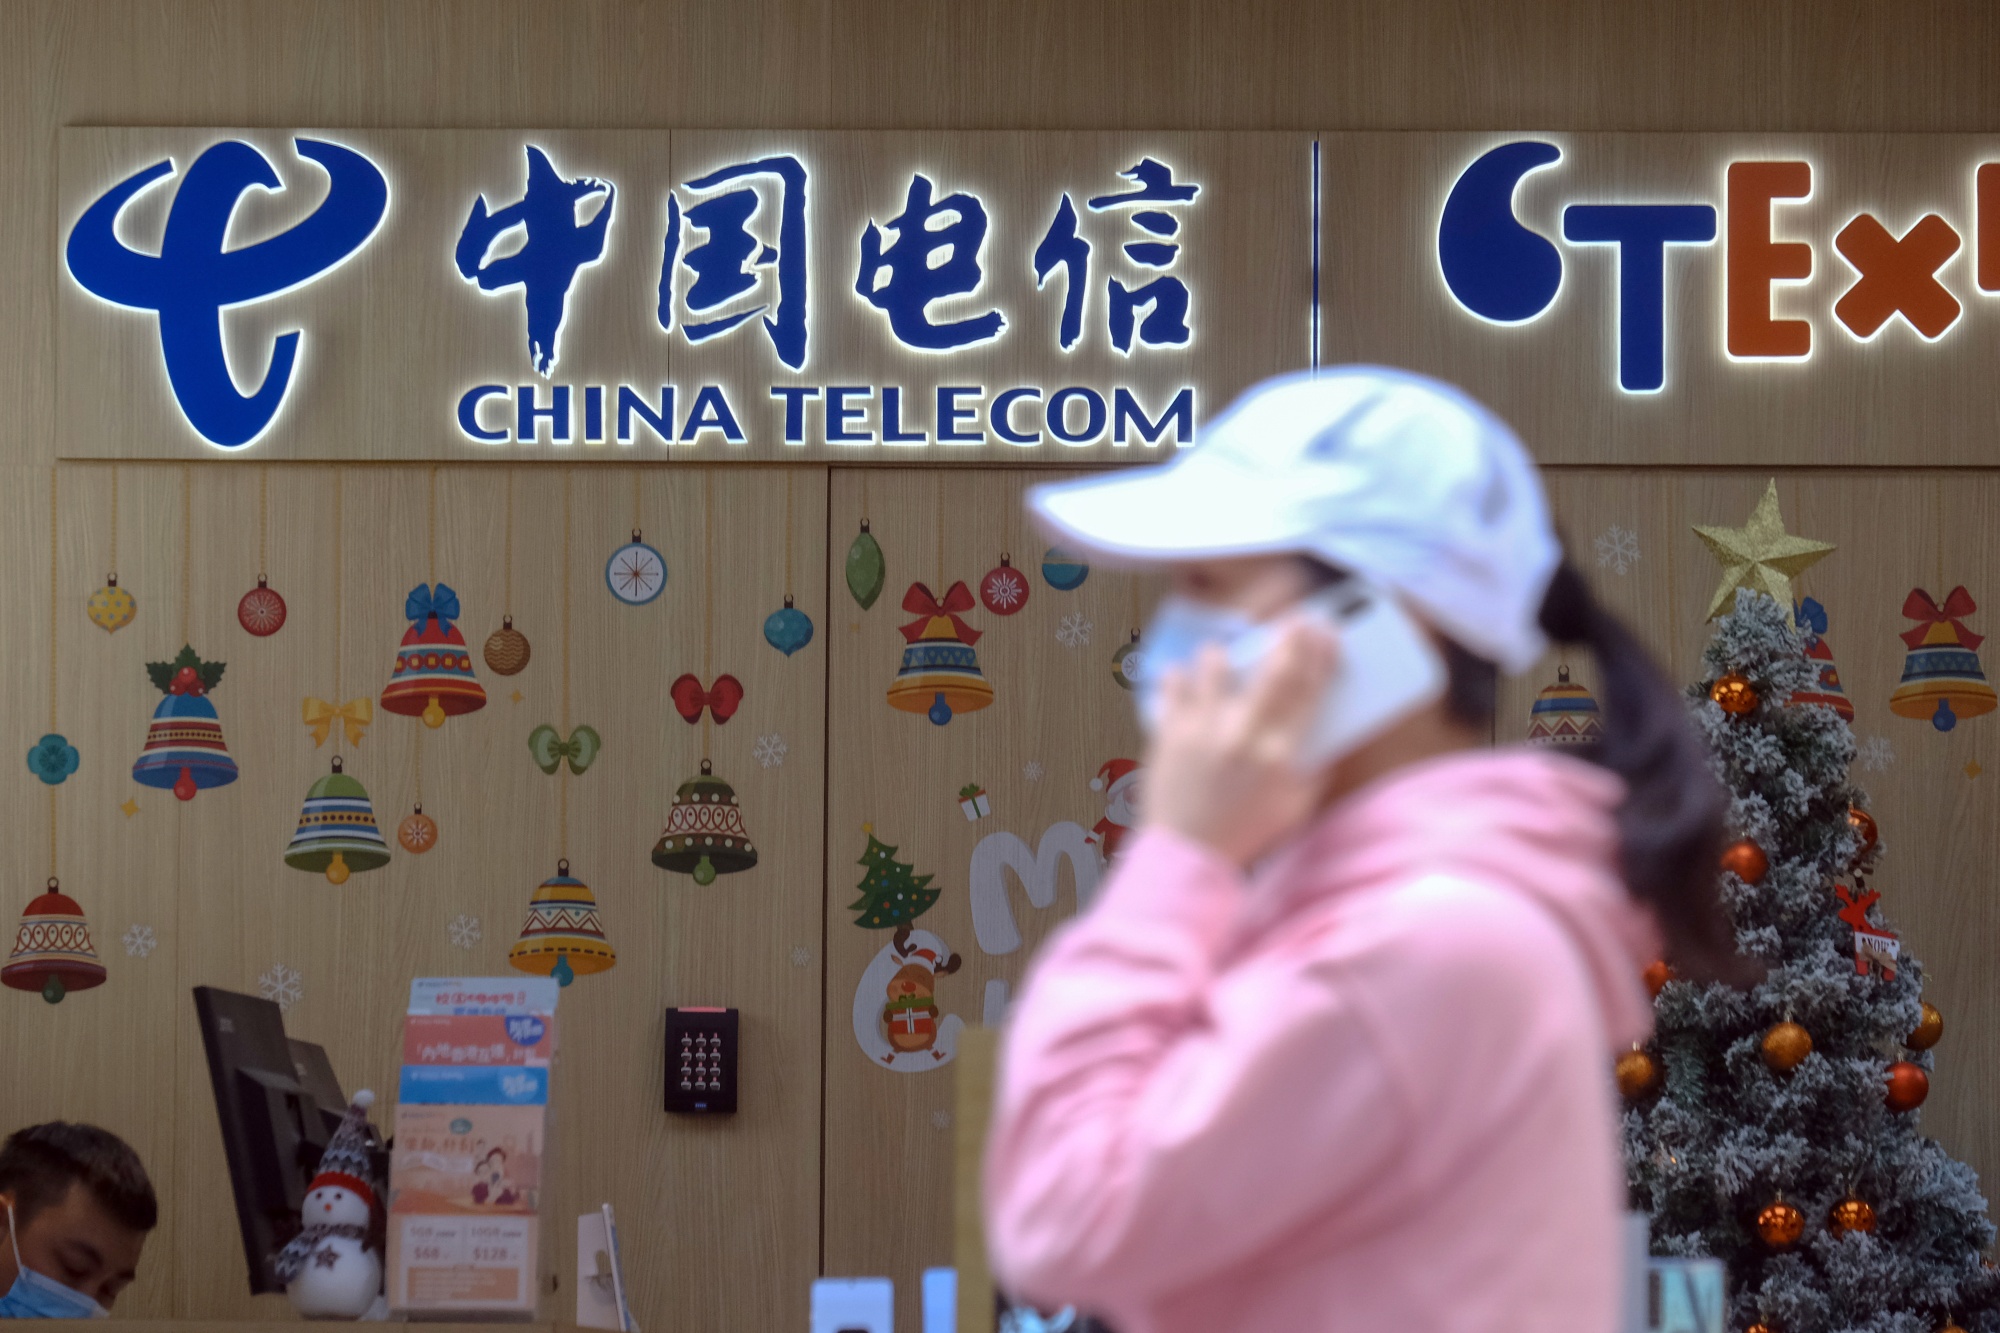 NYSE said it will suspend trading in the American depositary shares of China Mobile,&nbsp;China Telecom Corp.&nbsp;and China Unicom Hong Kong Ltd. before Jan. 11.